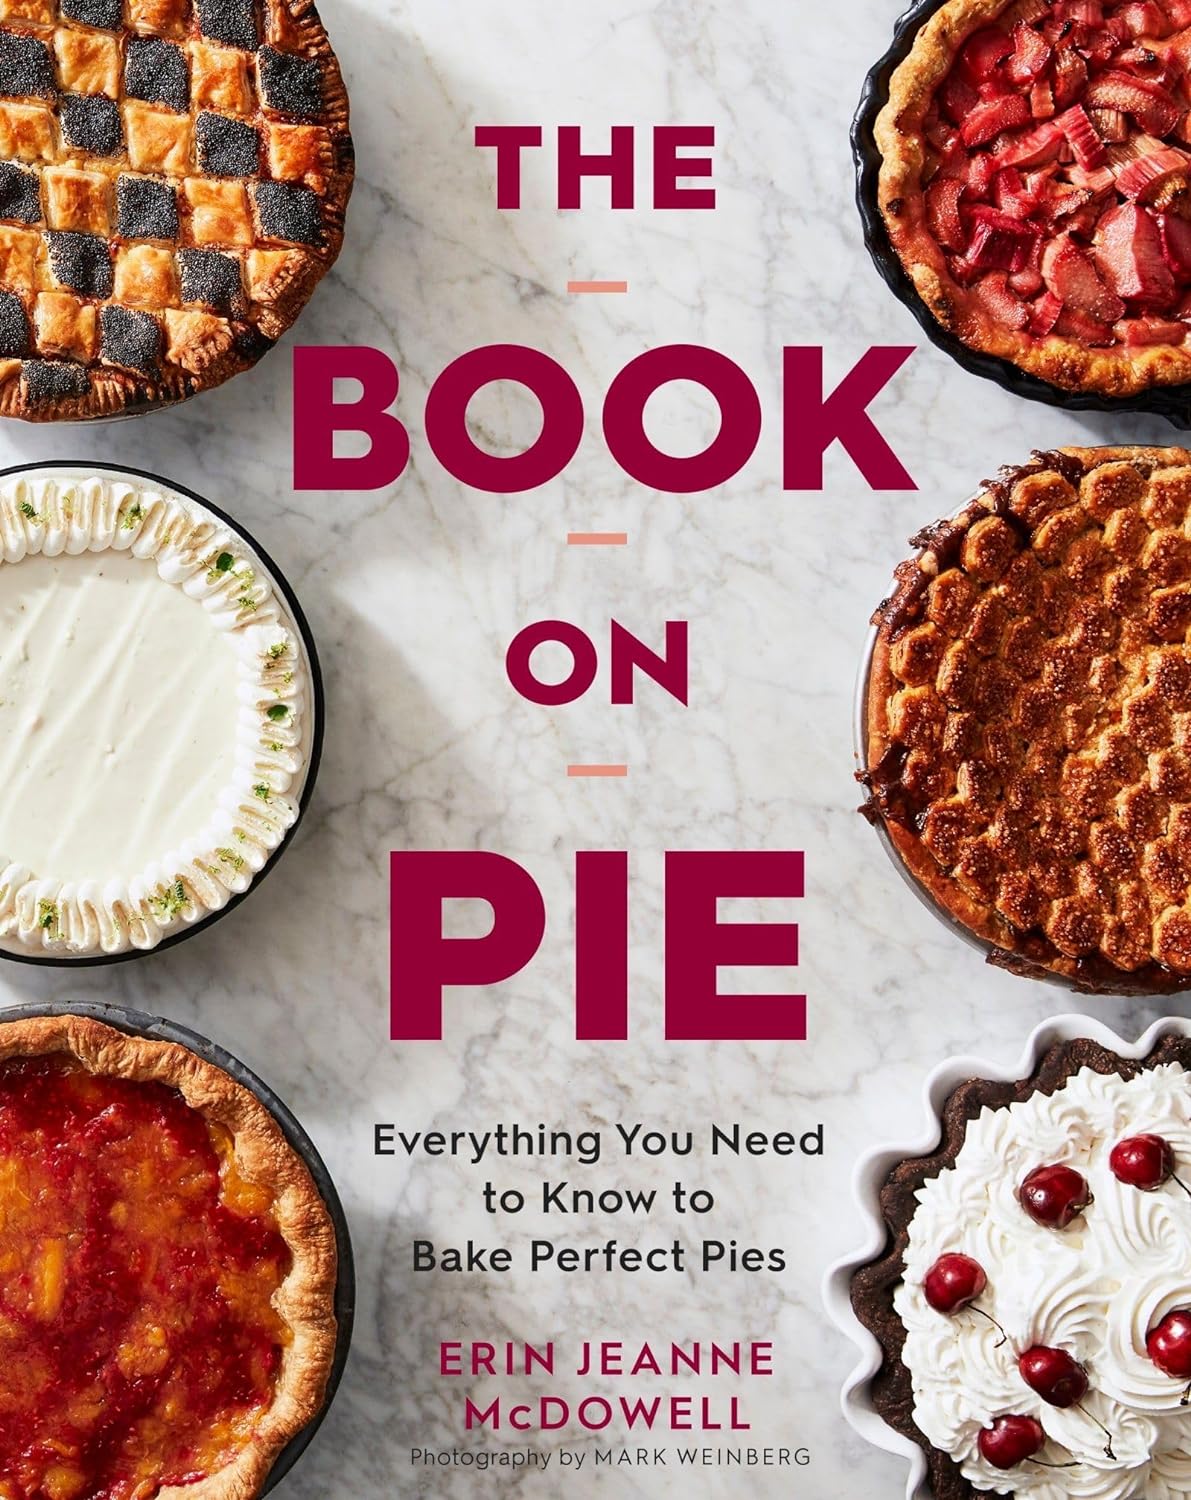 the book on pie everything you need to know to bake perfect pies hardcover november 10 2020